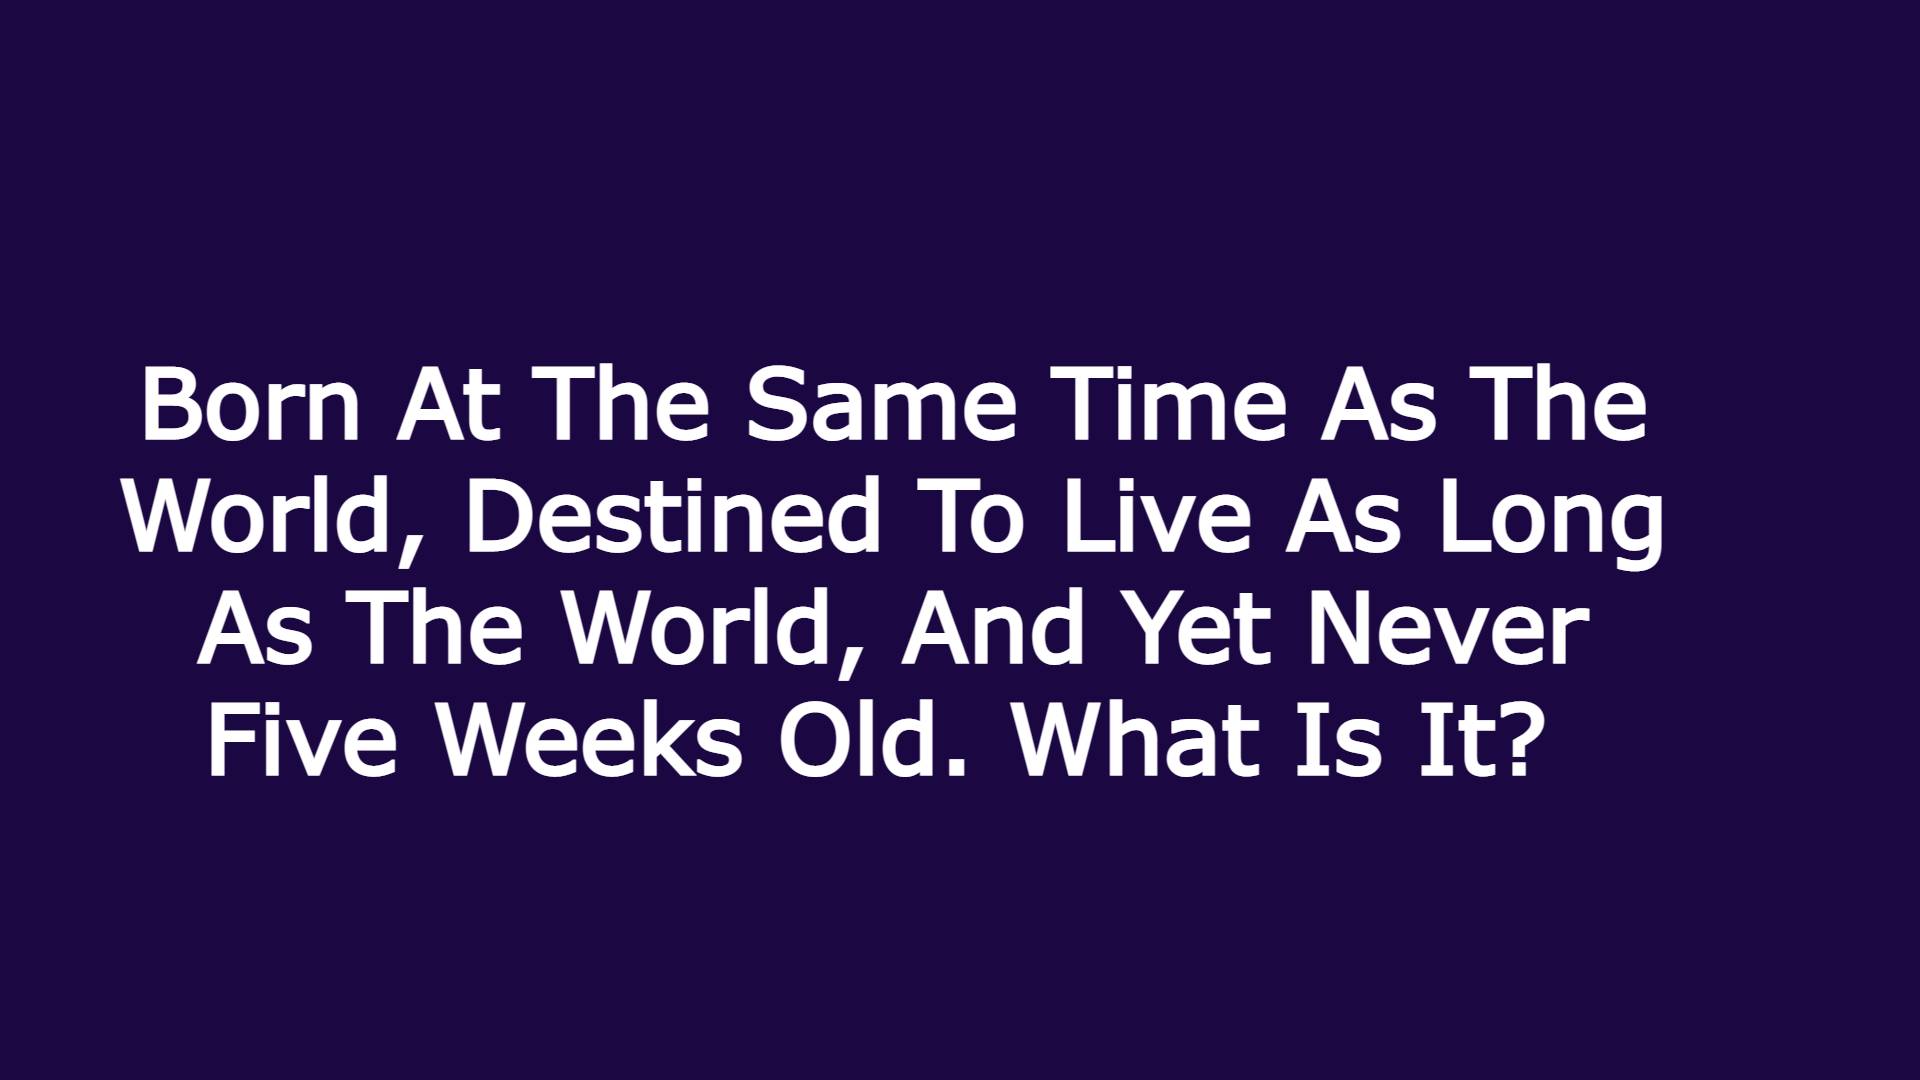 Born At The Same Time As The World, Destined To Live As Long As The World, And Yet Never Five Weeks Old. What Is It? 